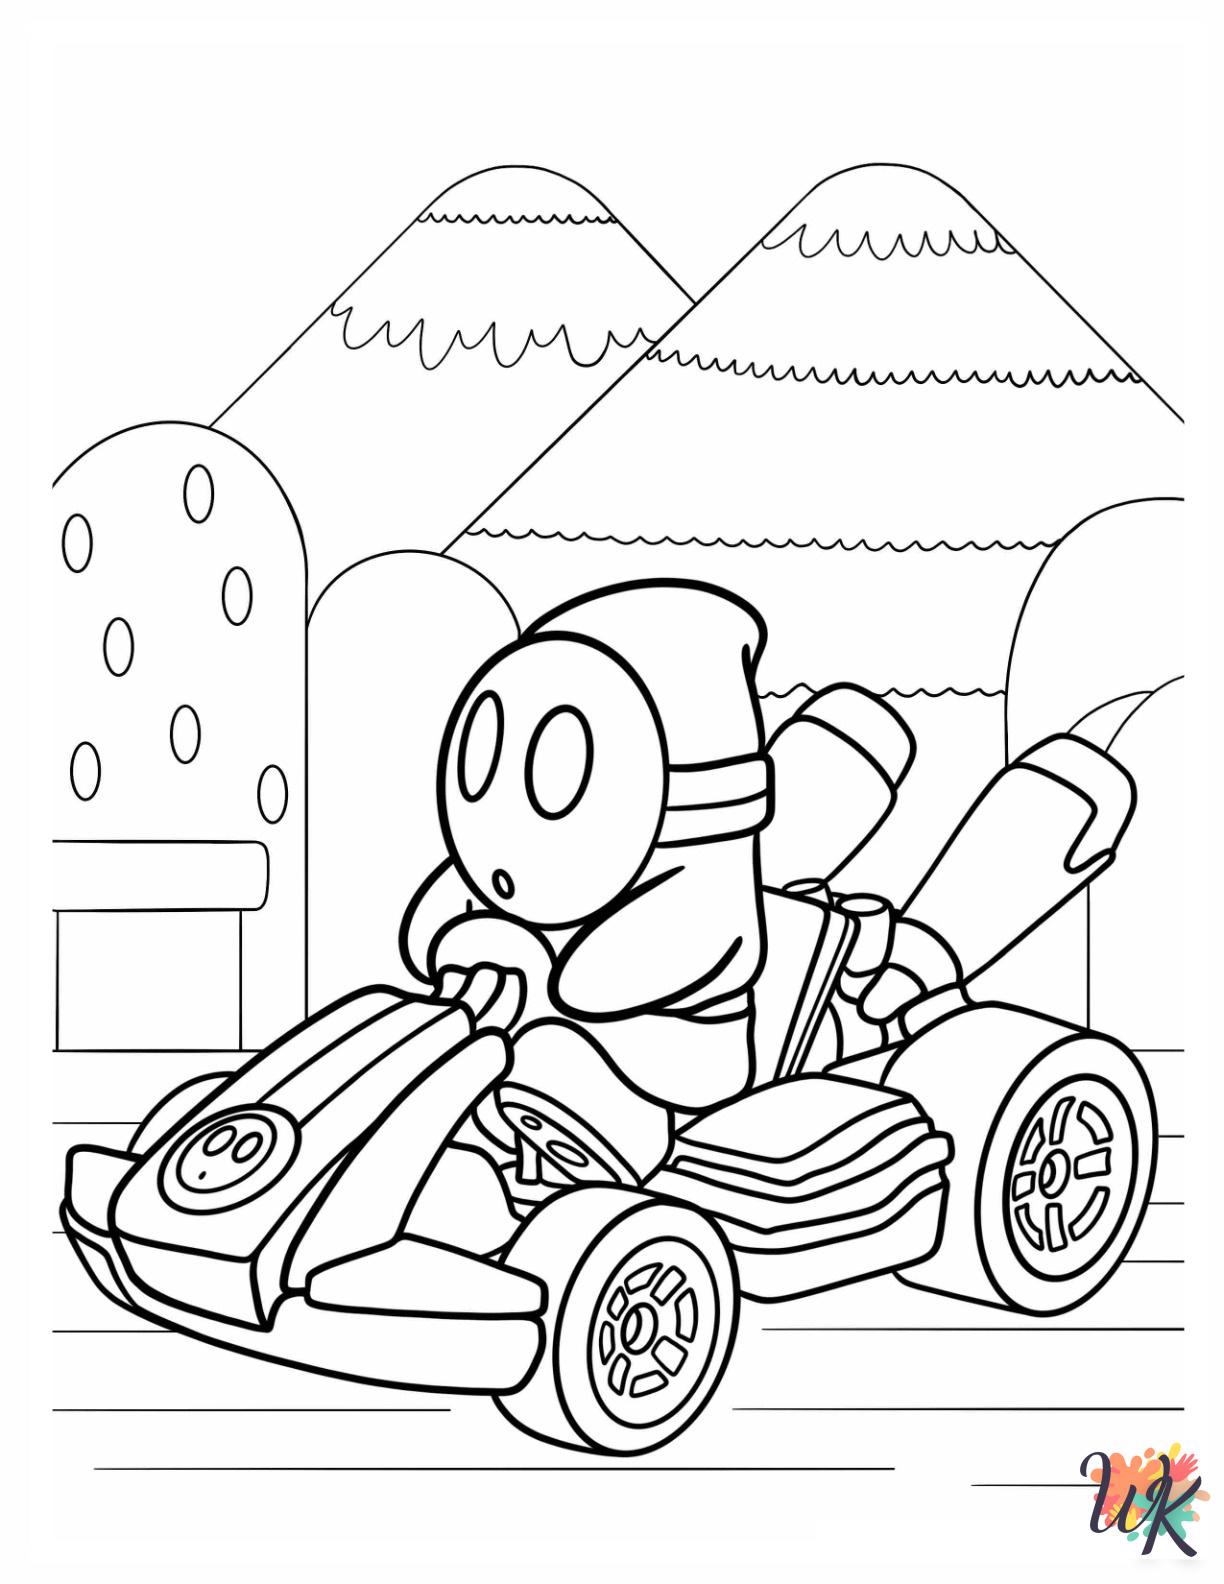 Shy Guy coloring book pages